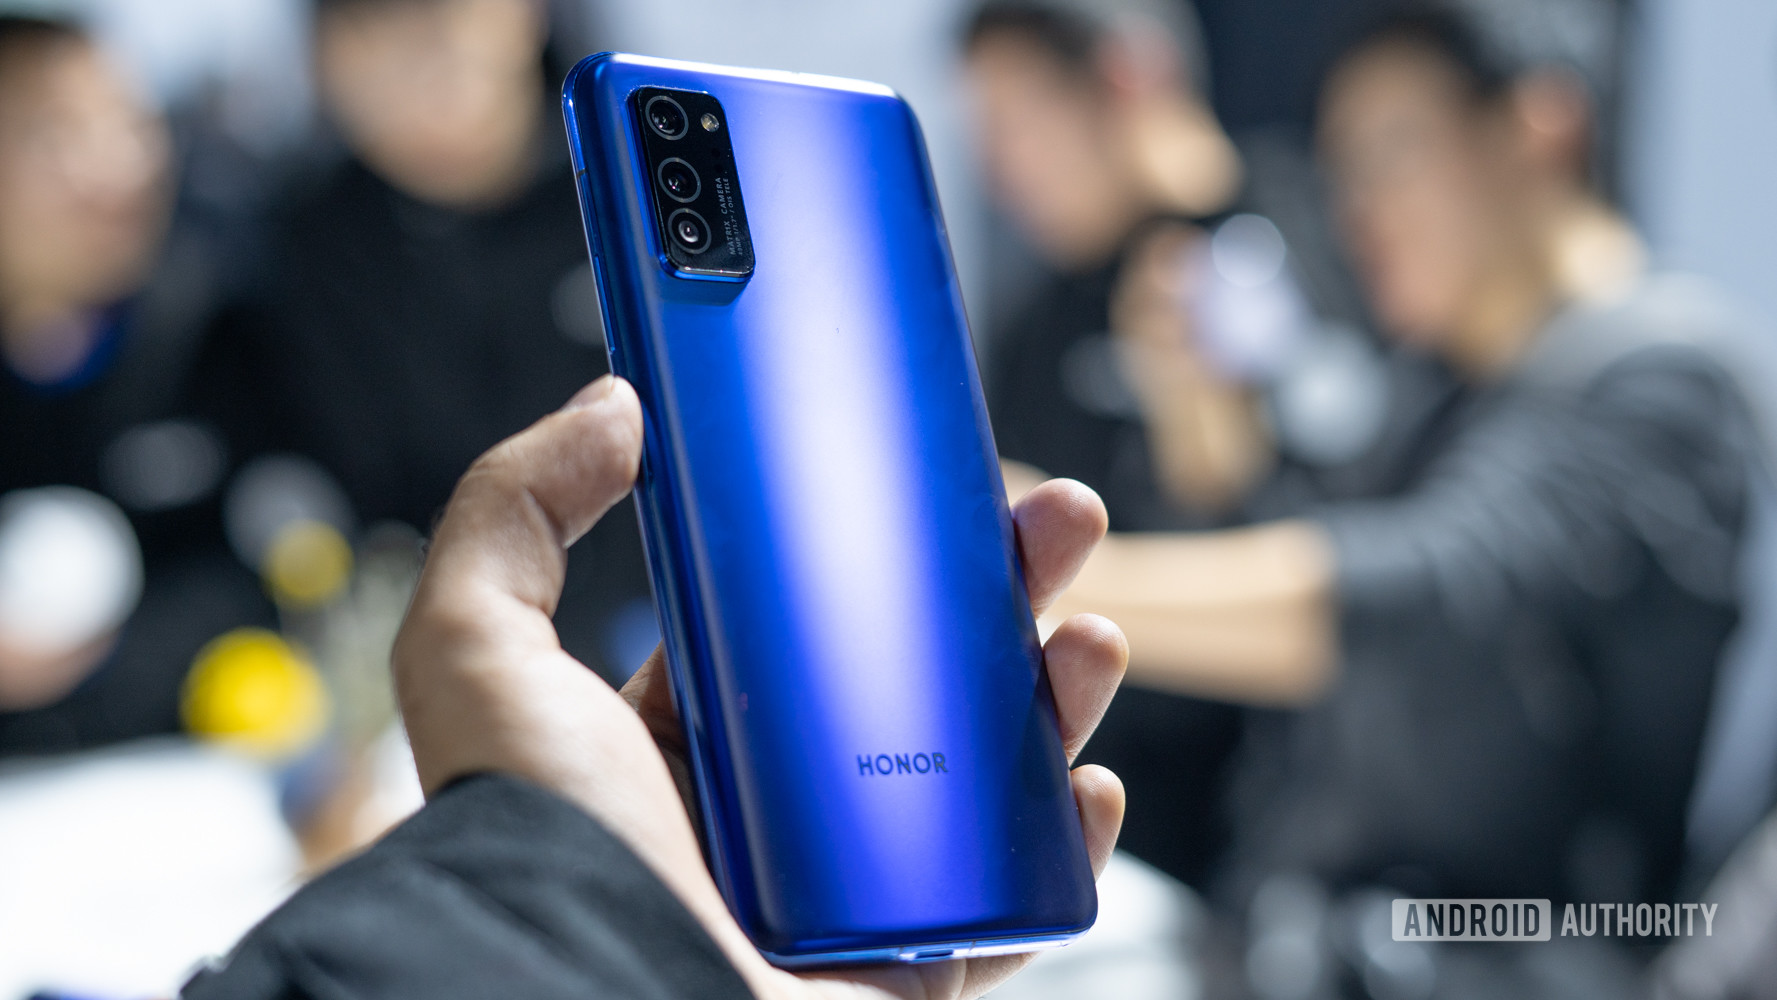 HONOR View 30 blue color in hand